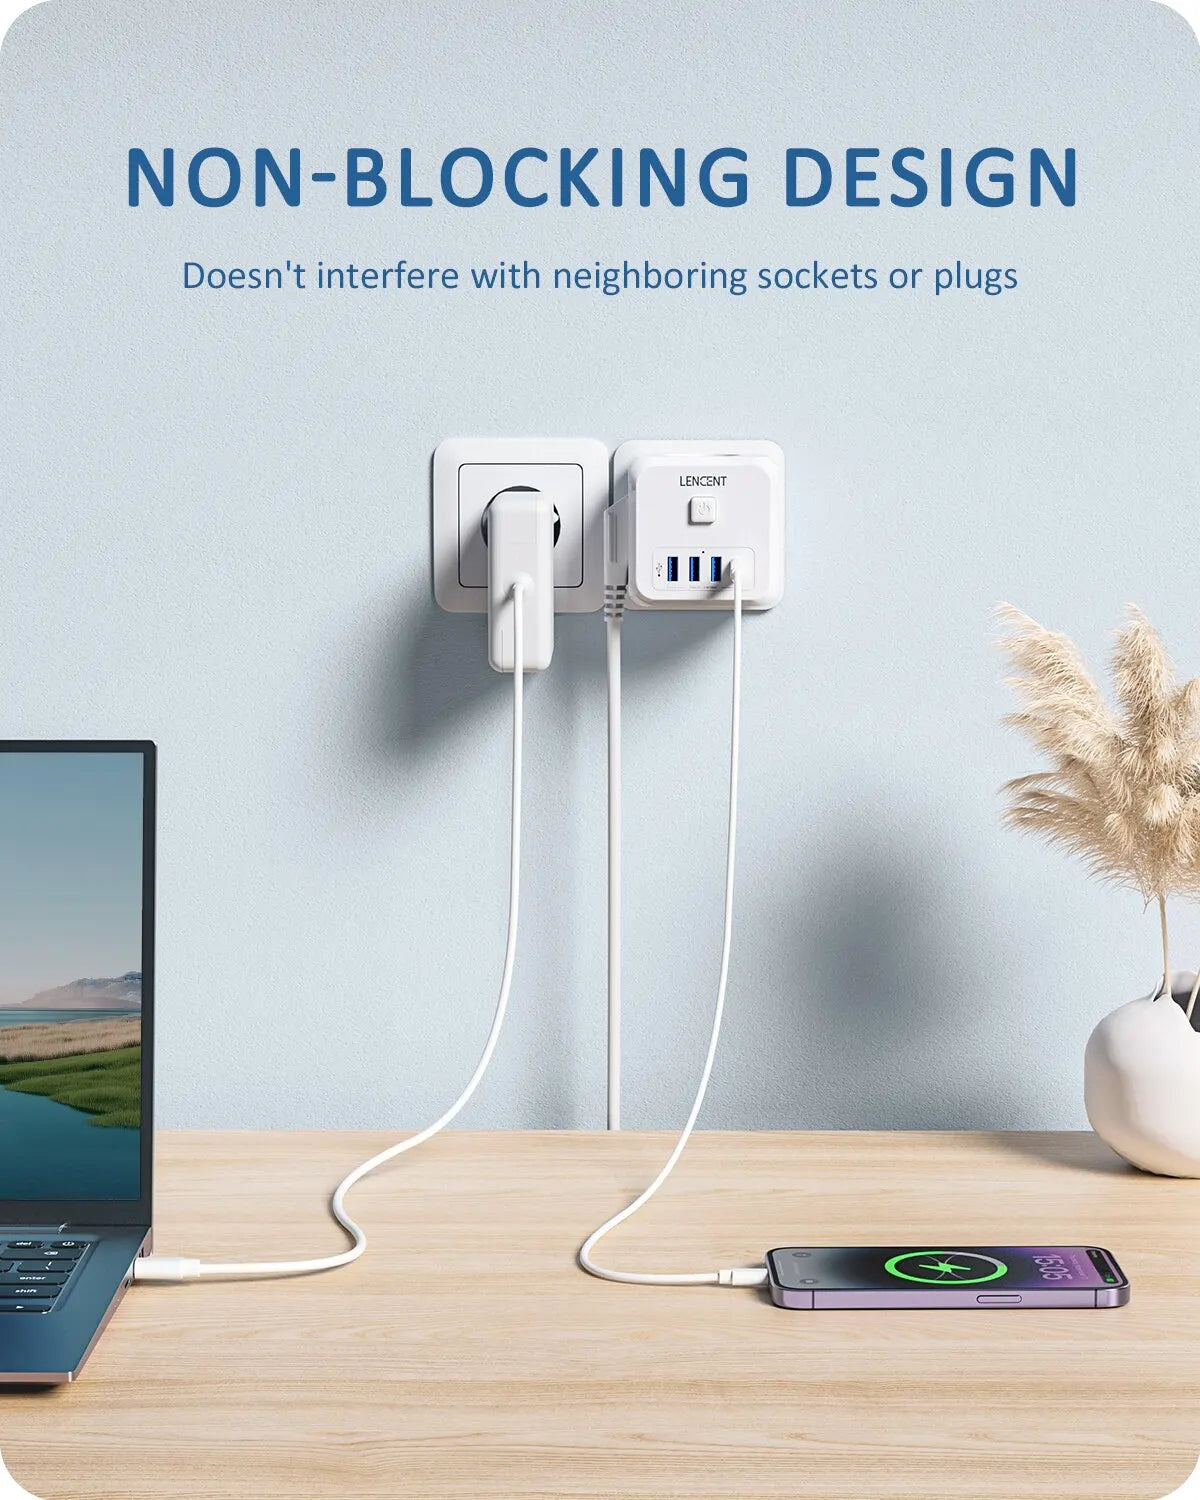 Wall Socket Extender with 3 AC Outlets 3 USB Ports And1 Type C 7-in-1 EU Plug Charger